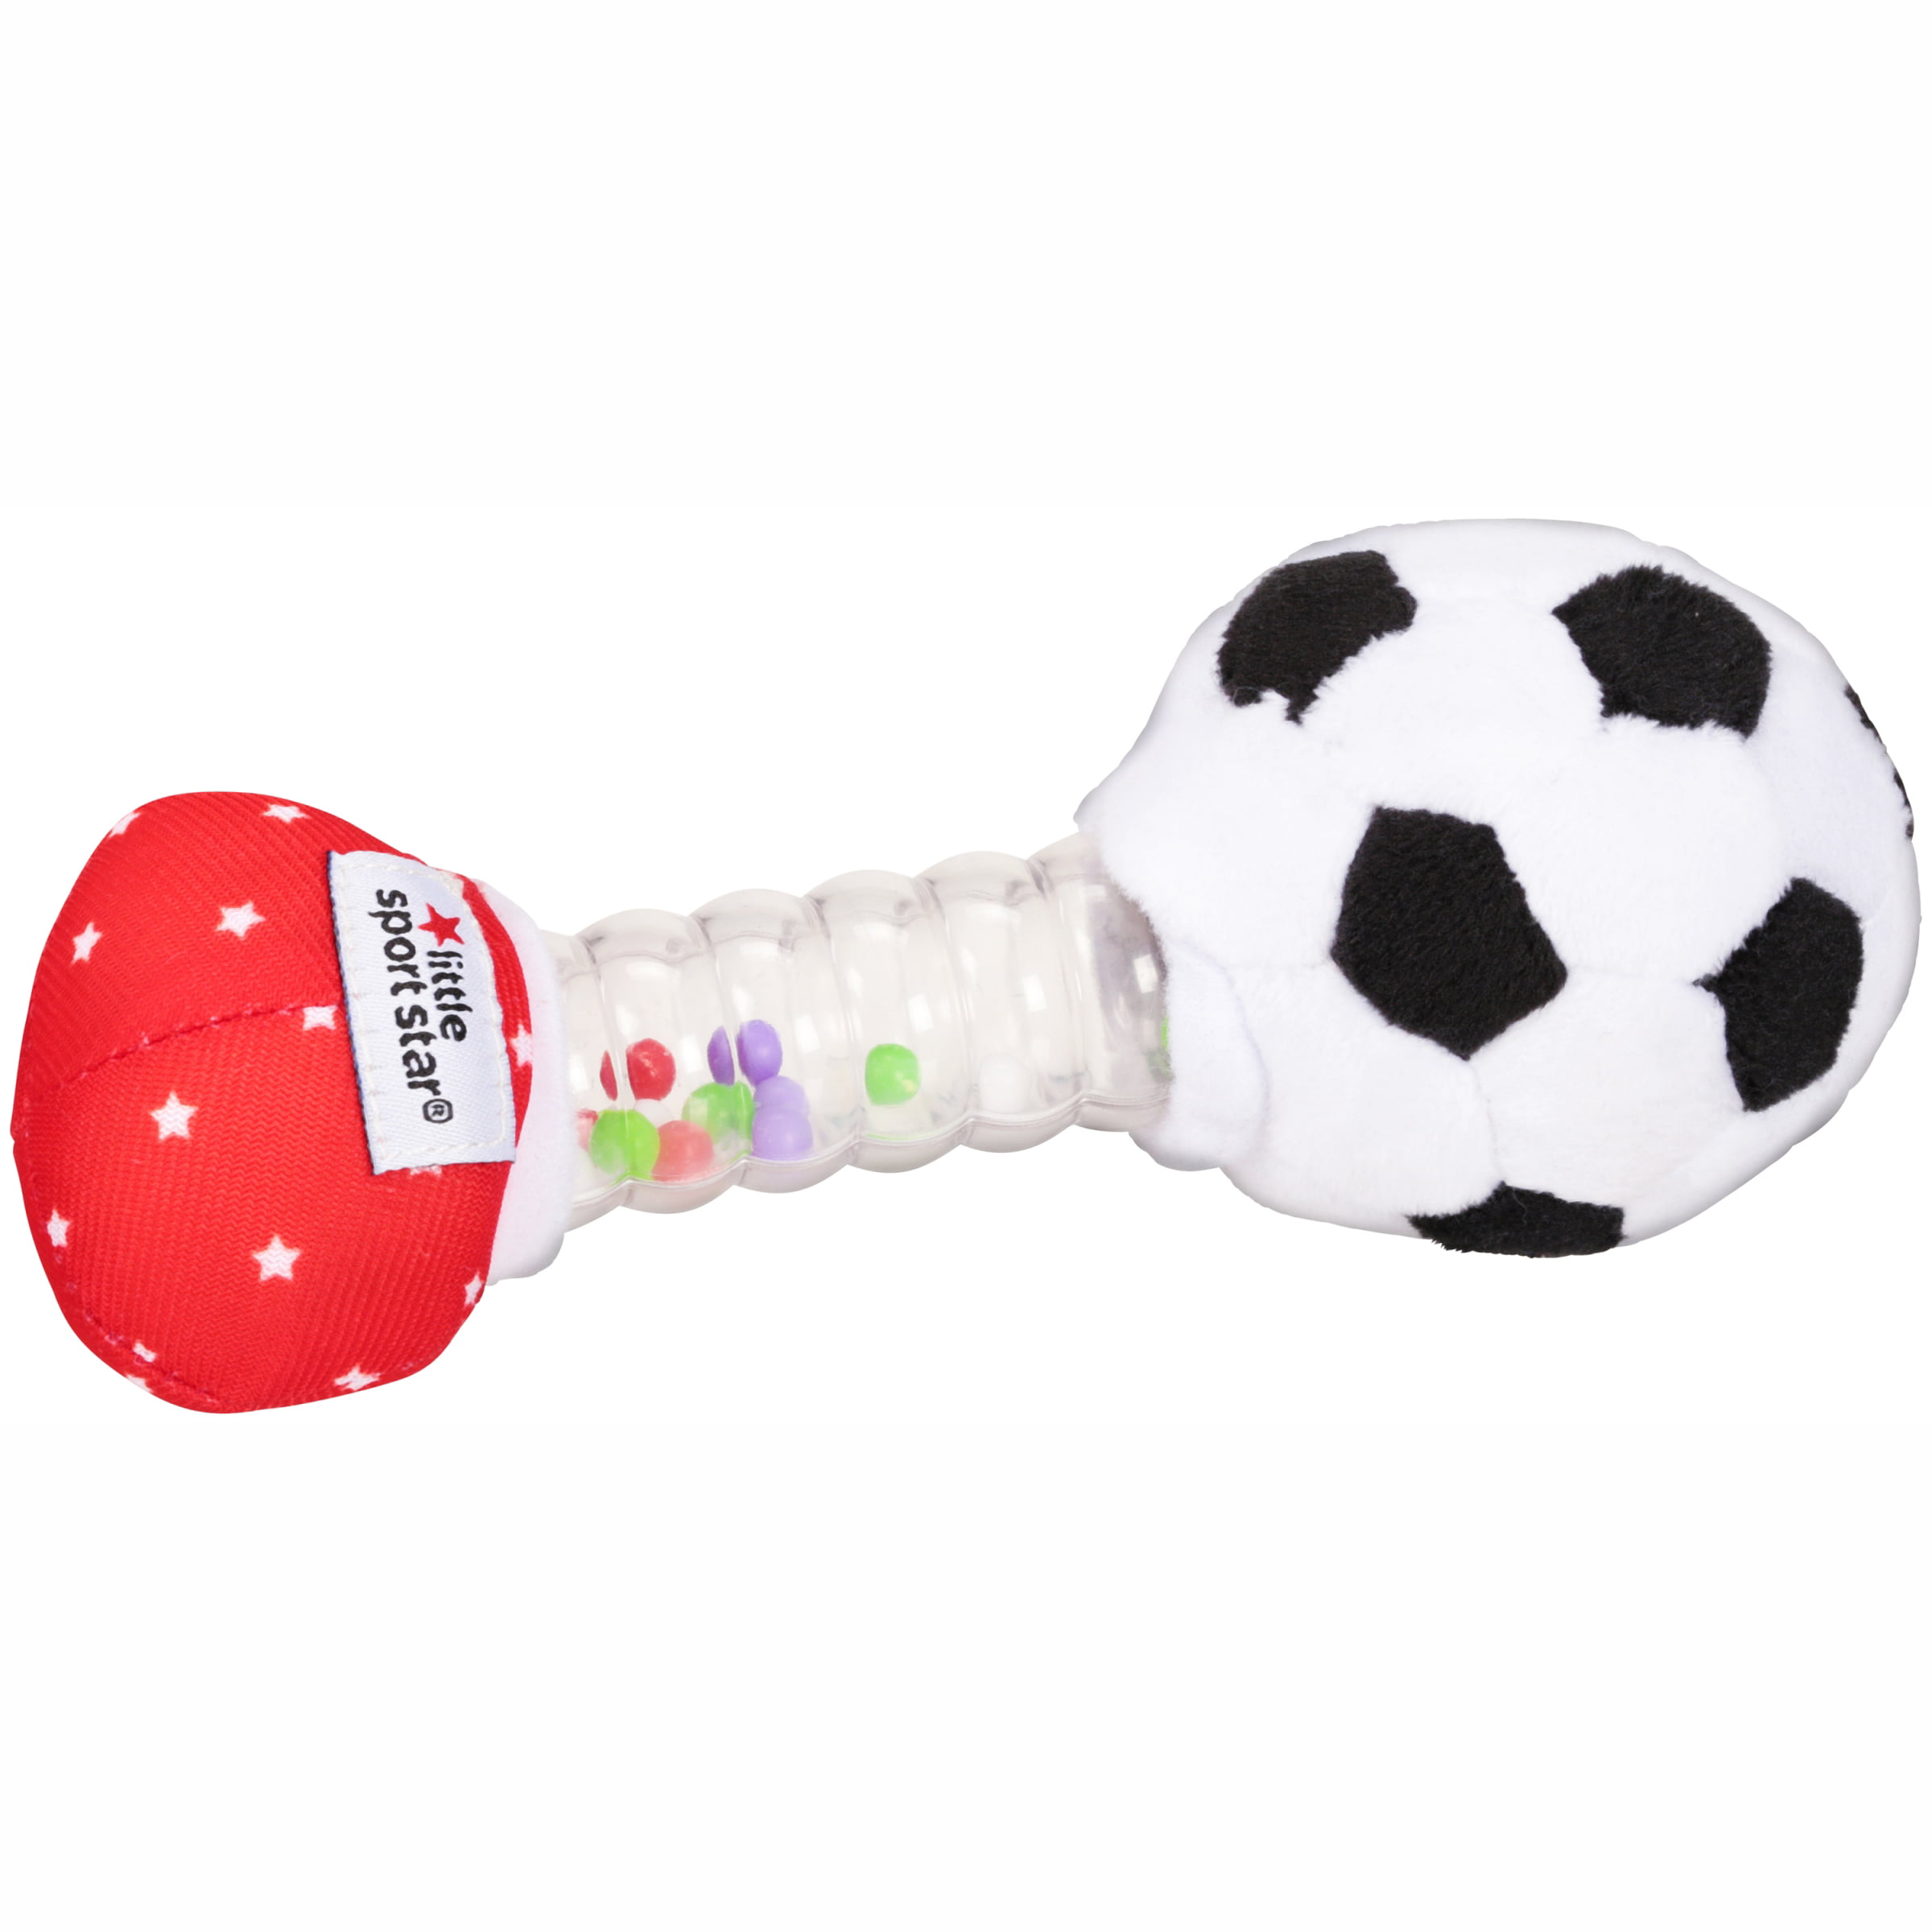 Soft Soccer Ball Football Baby Rattle Toy for Sports Toys Gift Colorful